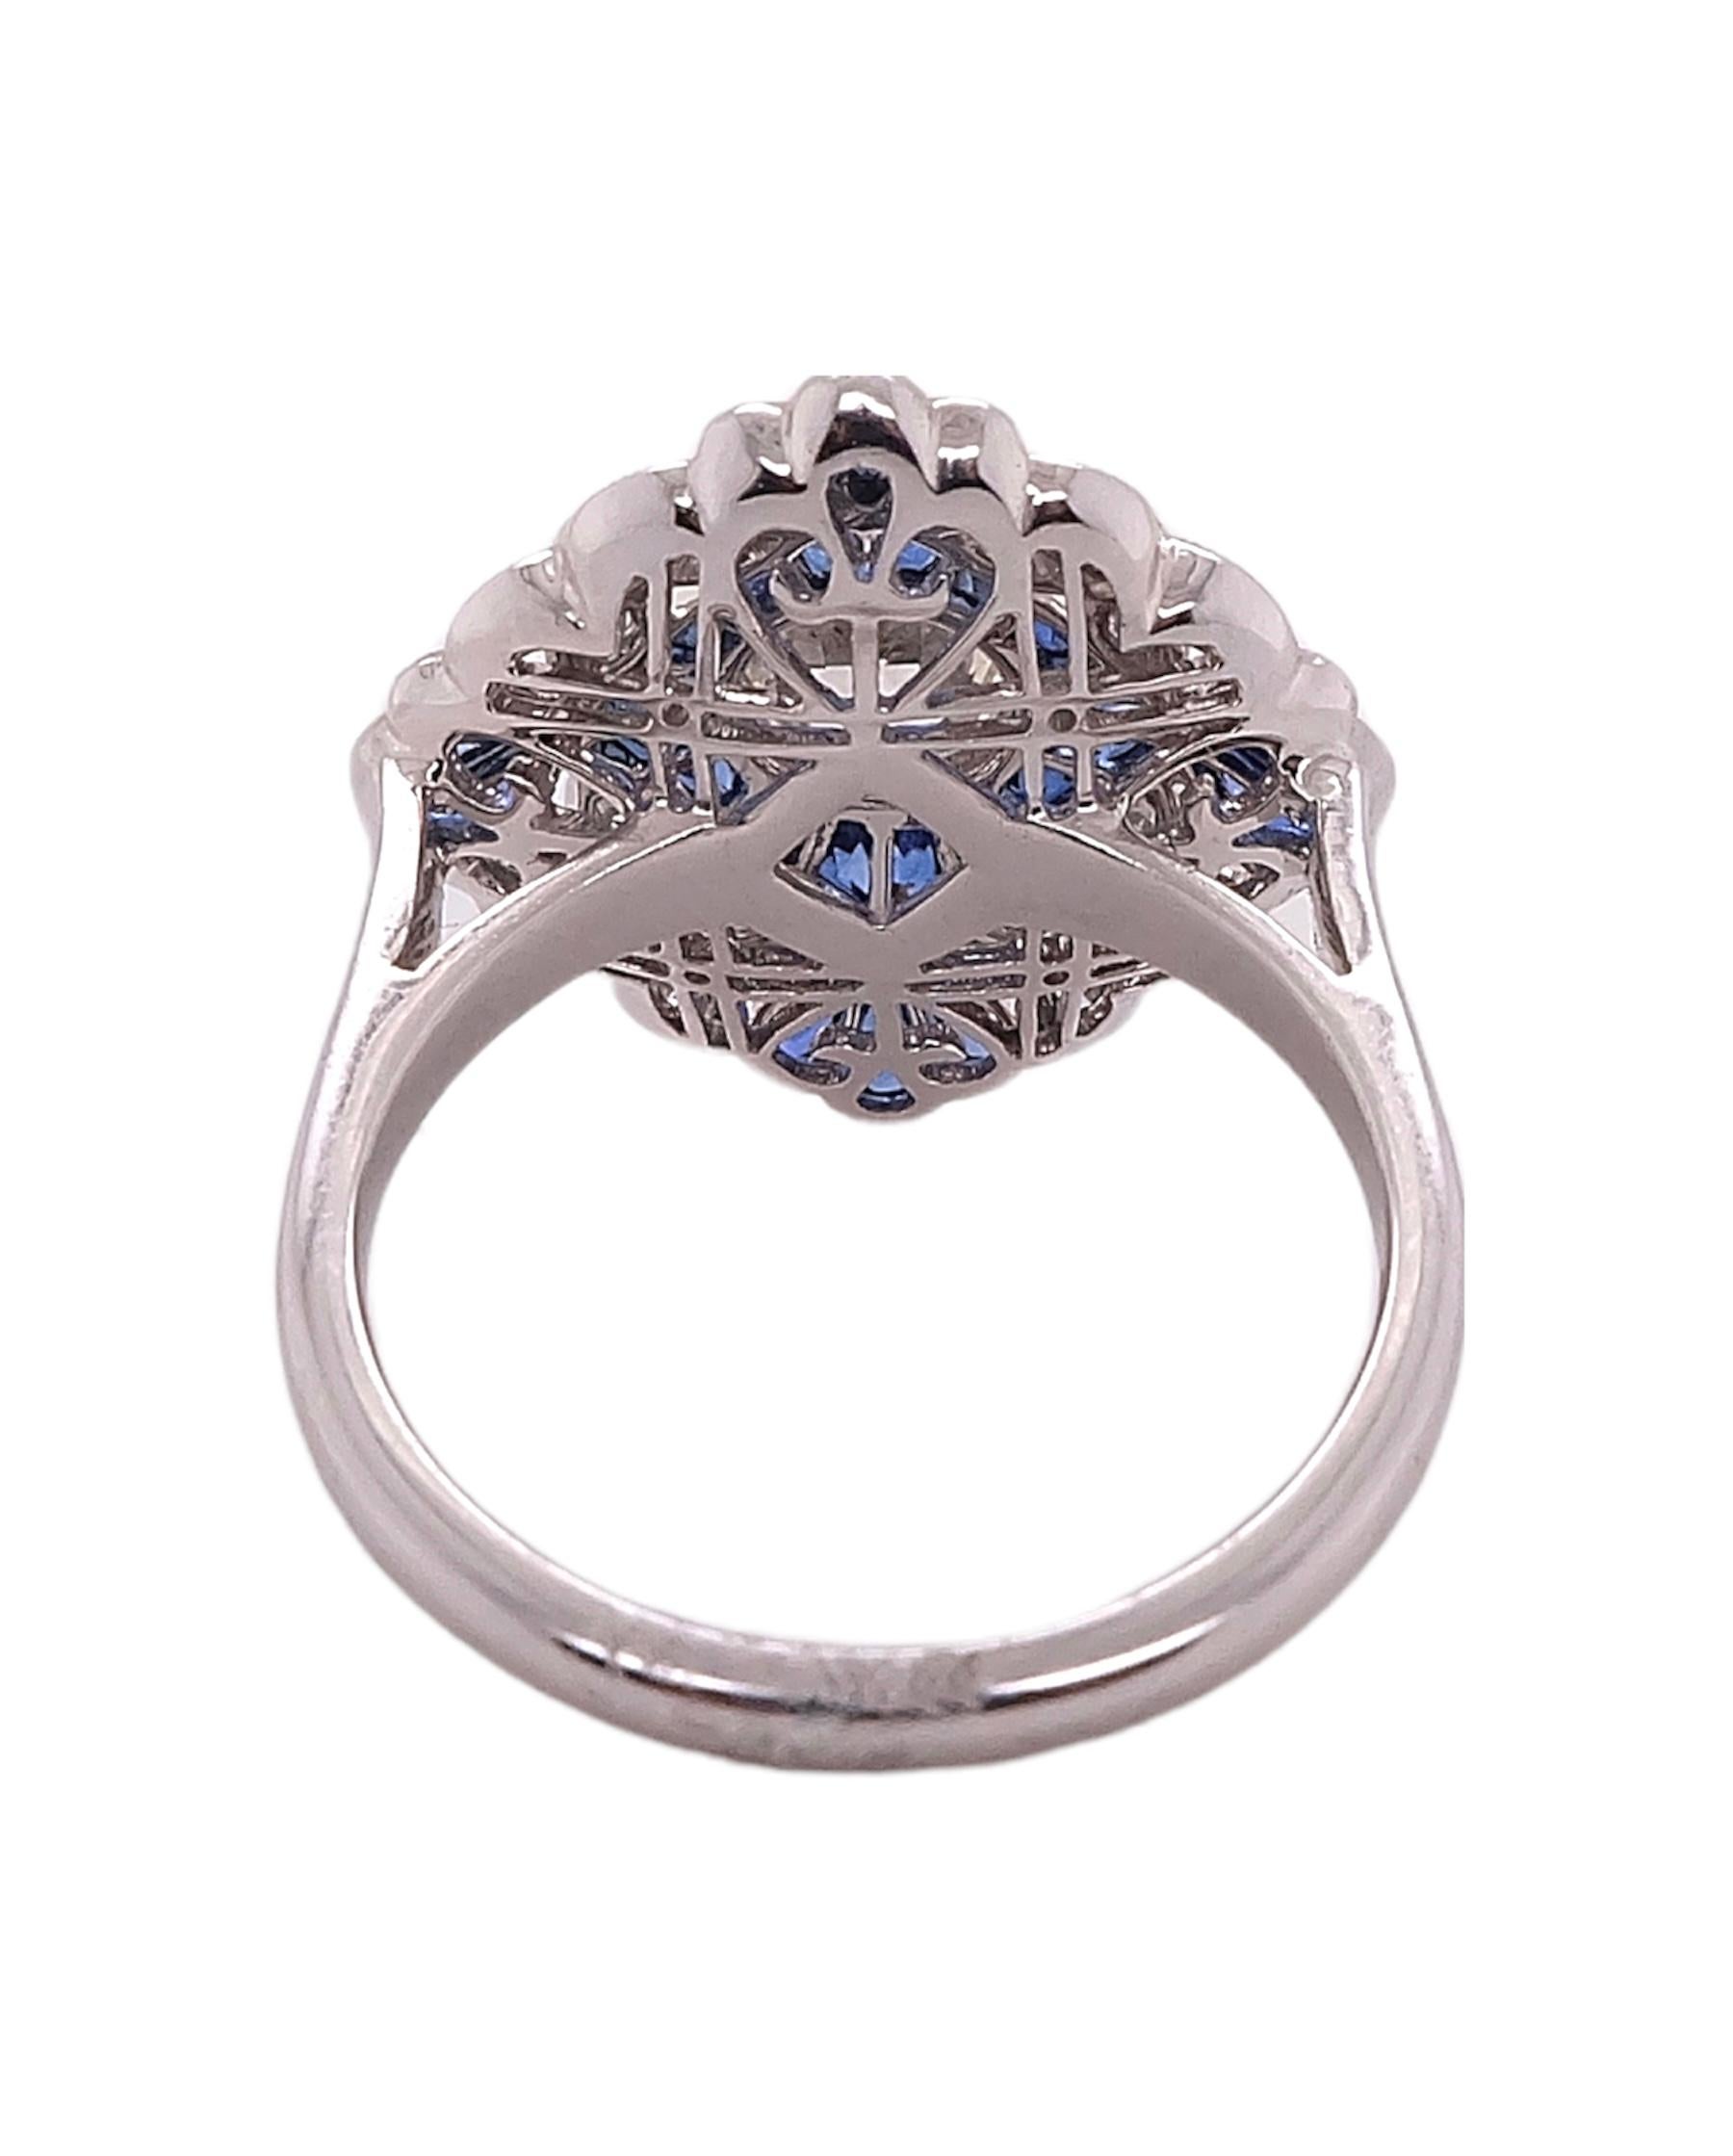 Blue Sapphire and Diamond Art Deco Style Platinum Ring by Sophia D. In New Condition For Sale In New York, NY